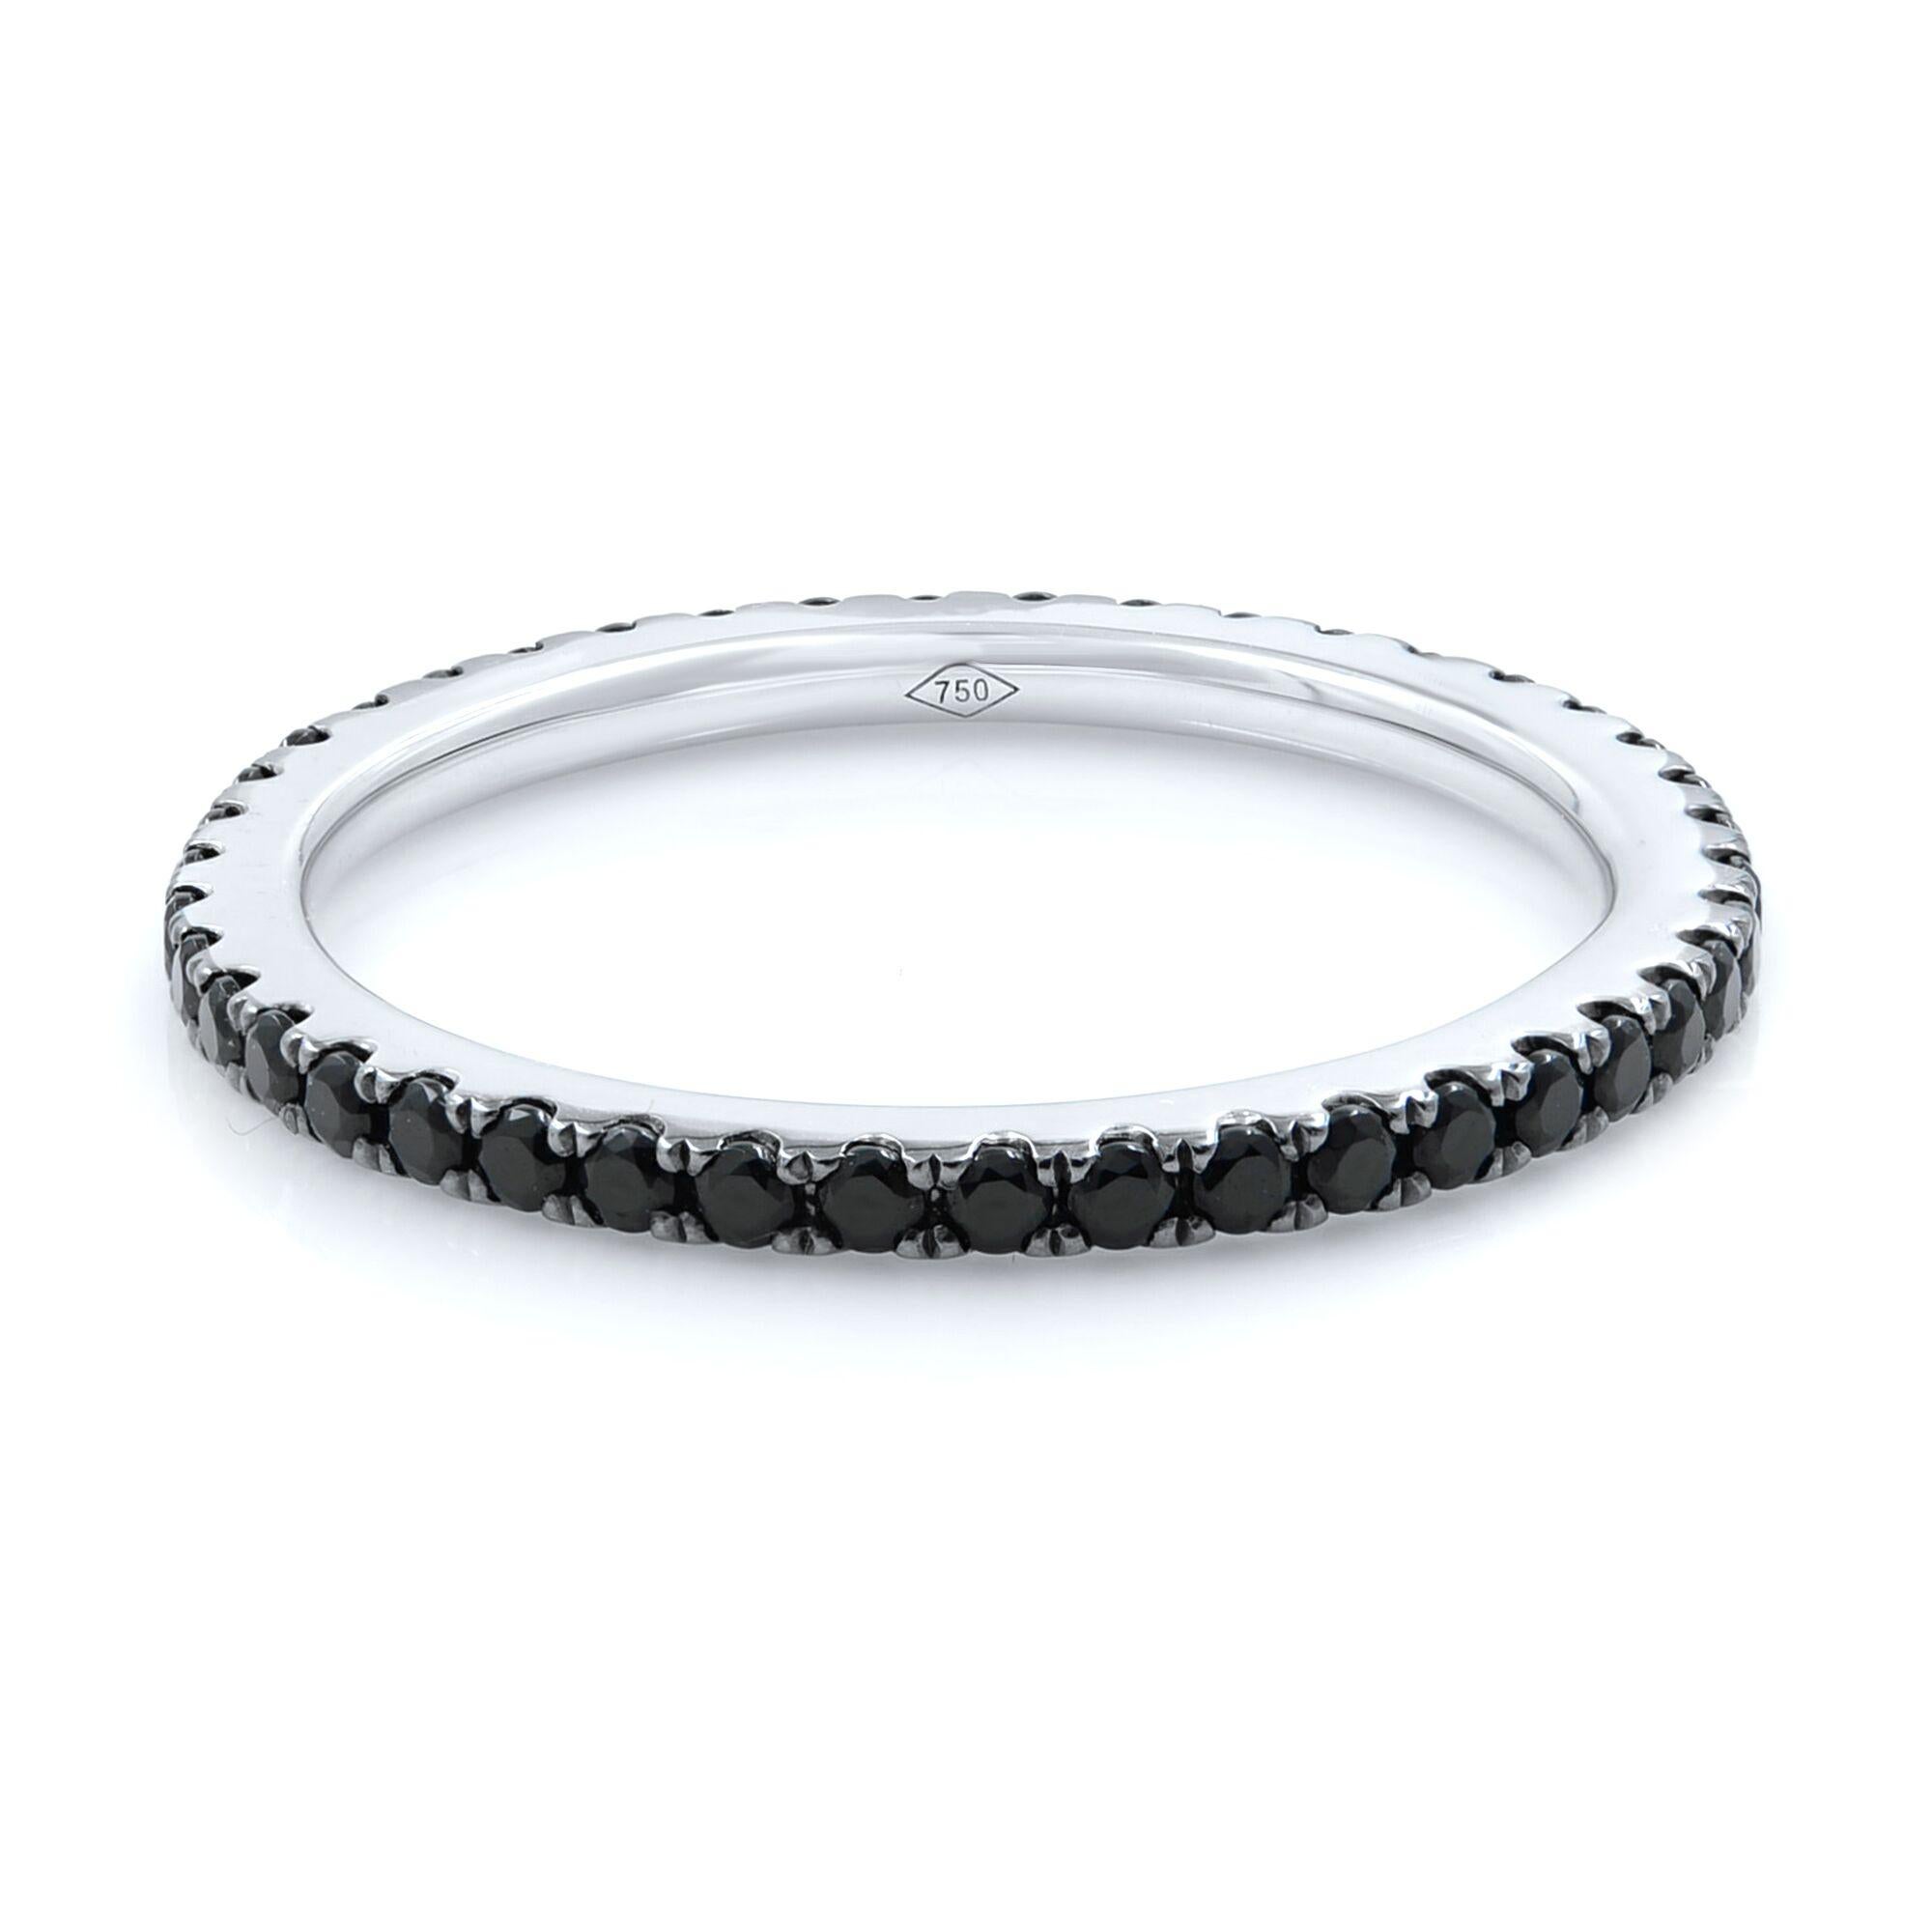 Dainty black diamond pave set eternity ring crafted in 18k white gold set with 0.54cts of natural black diamonds. 
Size: 6
Weight: 1.5 grams
